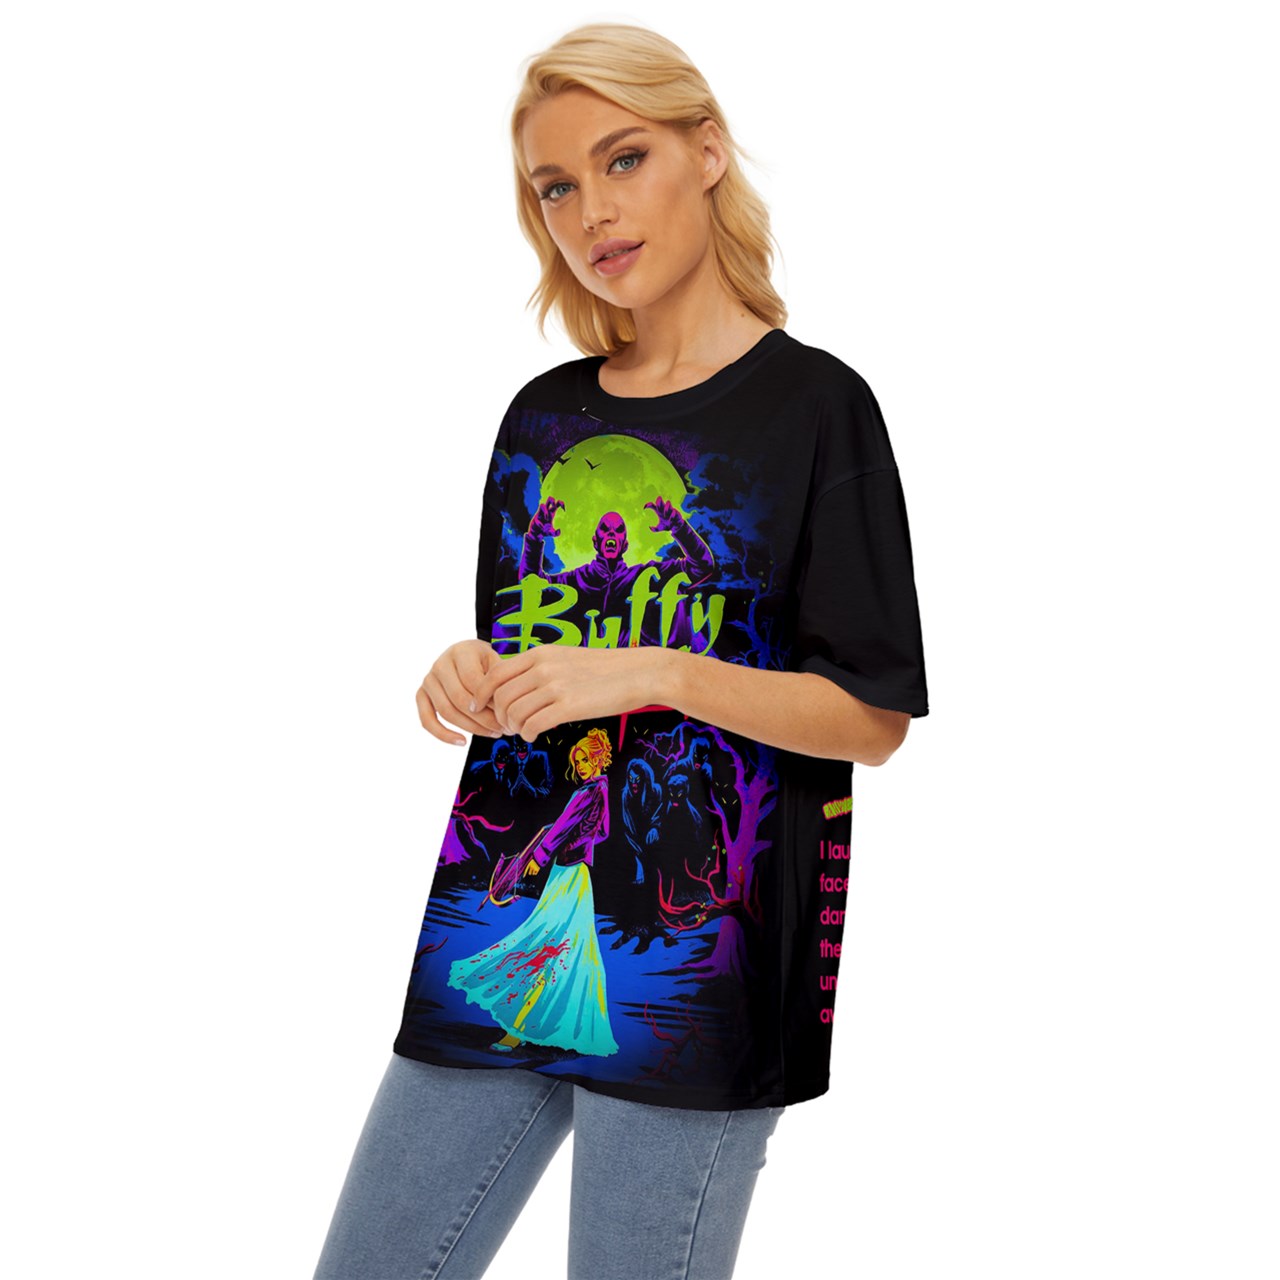 Buffy Poster oversized tee